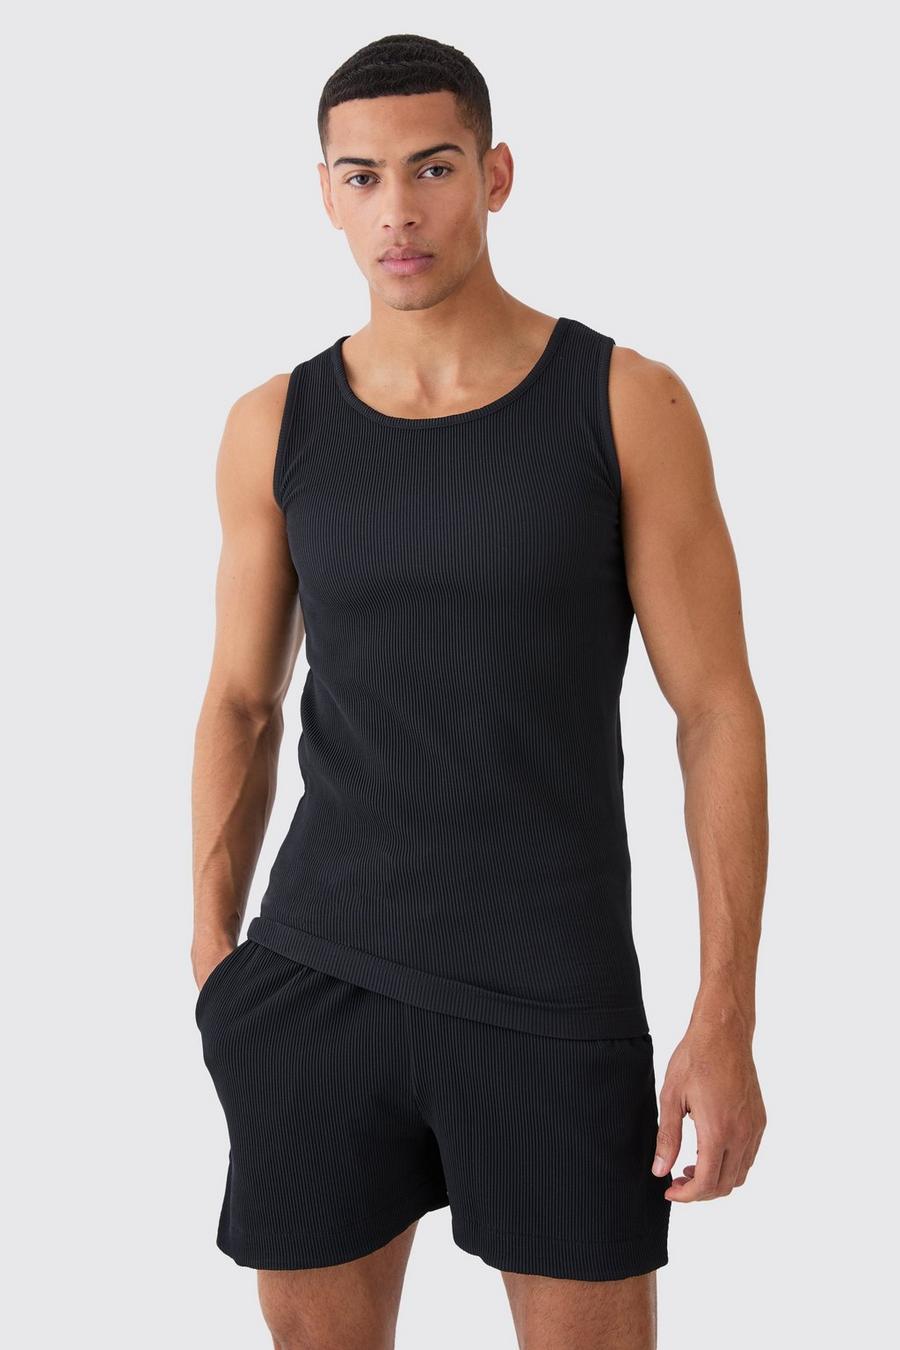 Black Pleated Muscle Vest And Runner Short